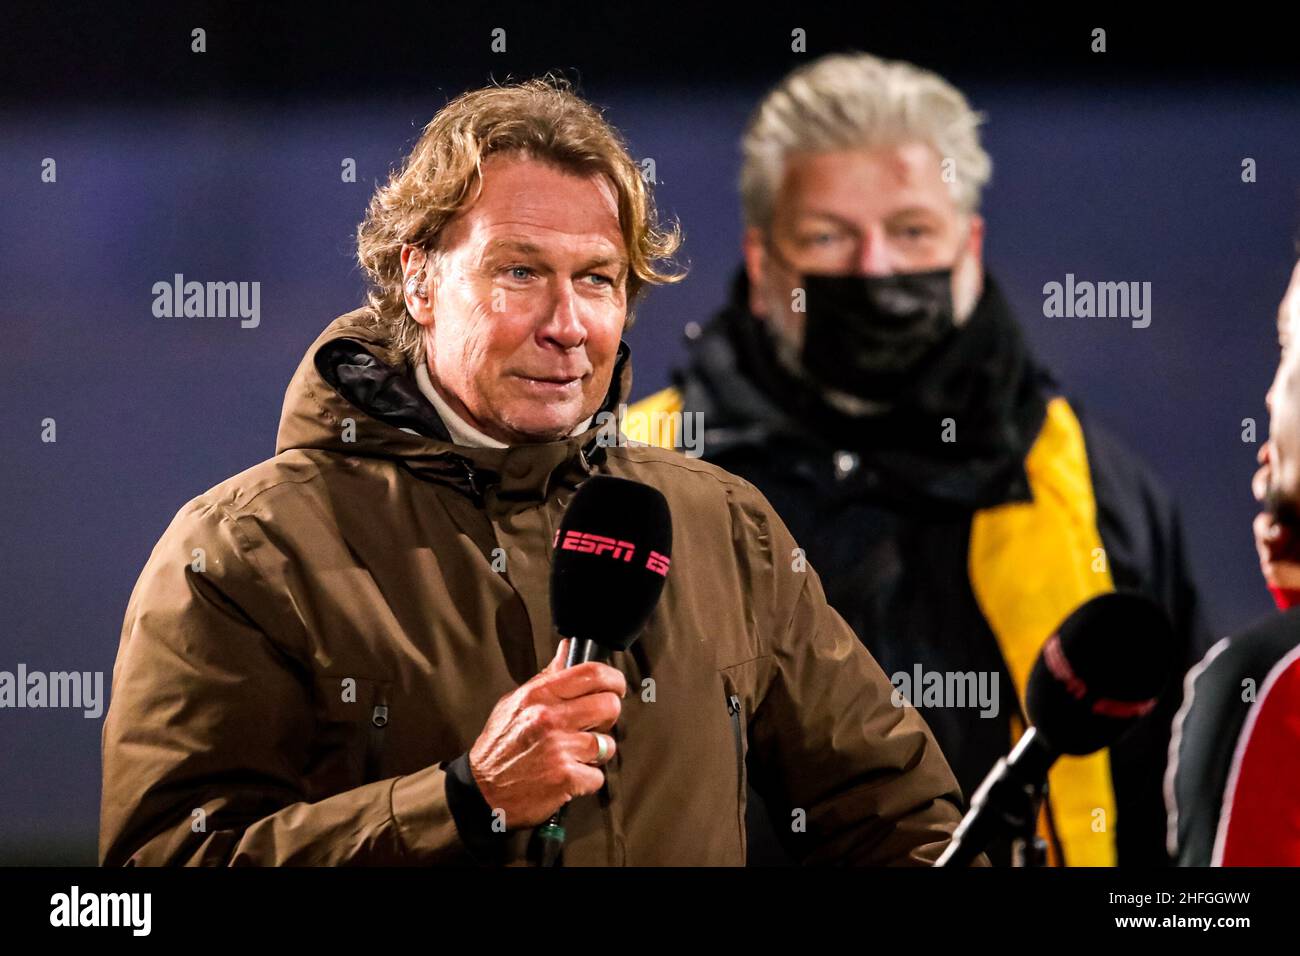 Dutch Presentator High Resolution Stock Photography and Images - Alamy